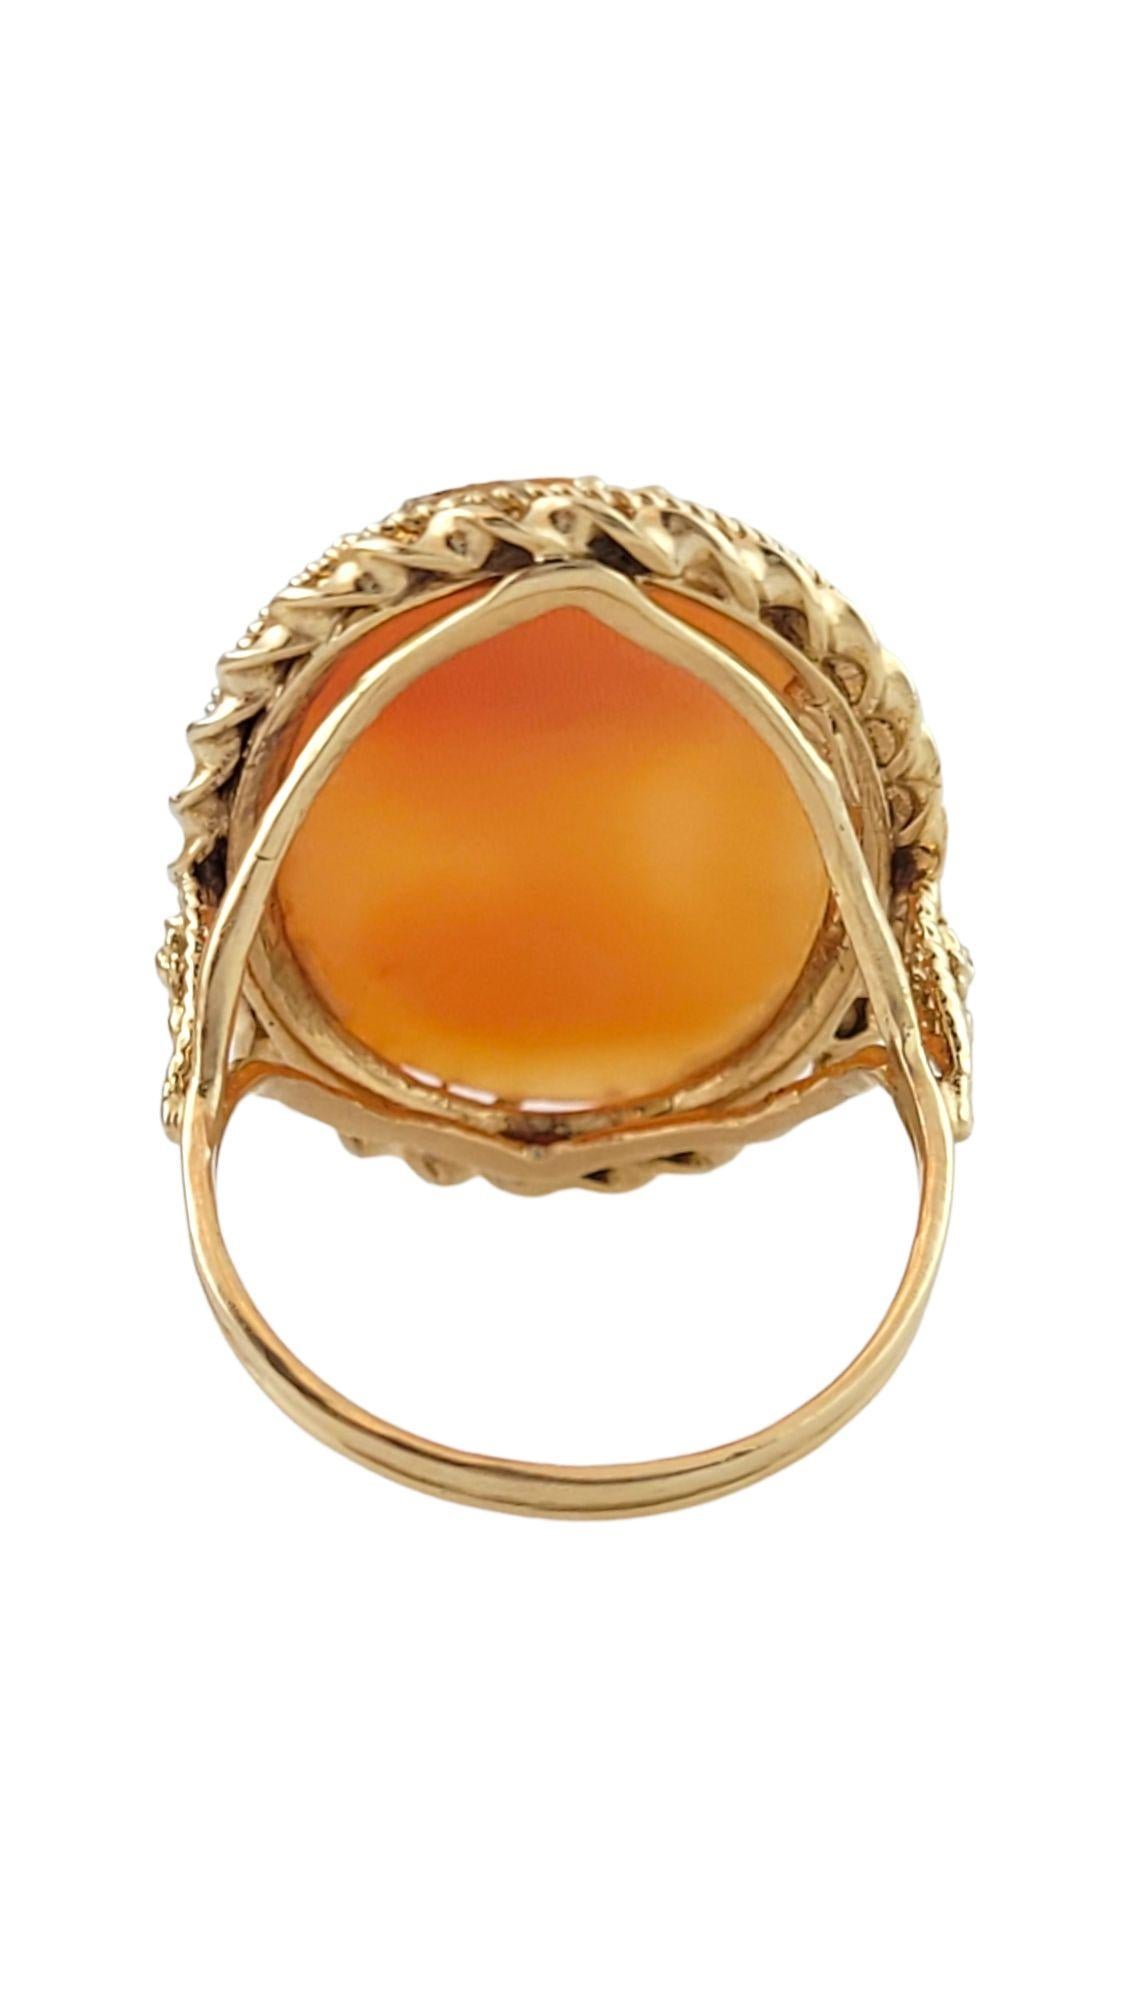 This gorgeous cameo ring is set in 10K yellow gold for a beautiful finish!

Ring size: 8 3/4

Shank: 2mm

Front: 29.3mm X 21.9mm X 7mm

Weight: 6.84 g/ 4.4 dwt

Hallmark: 10K

Very good condition, professionally polished.

Will come packaged in a